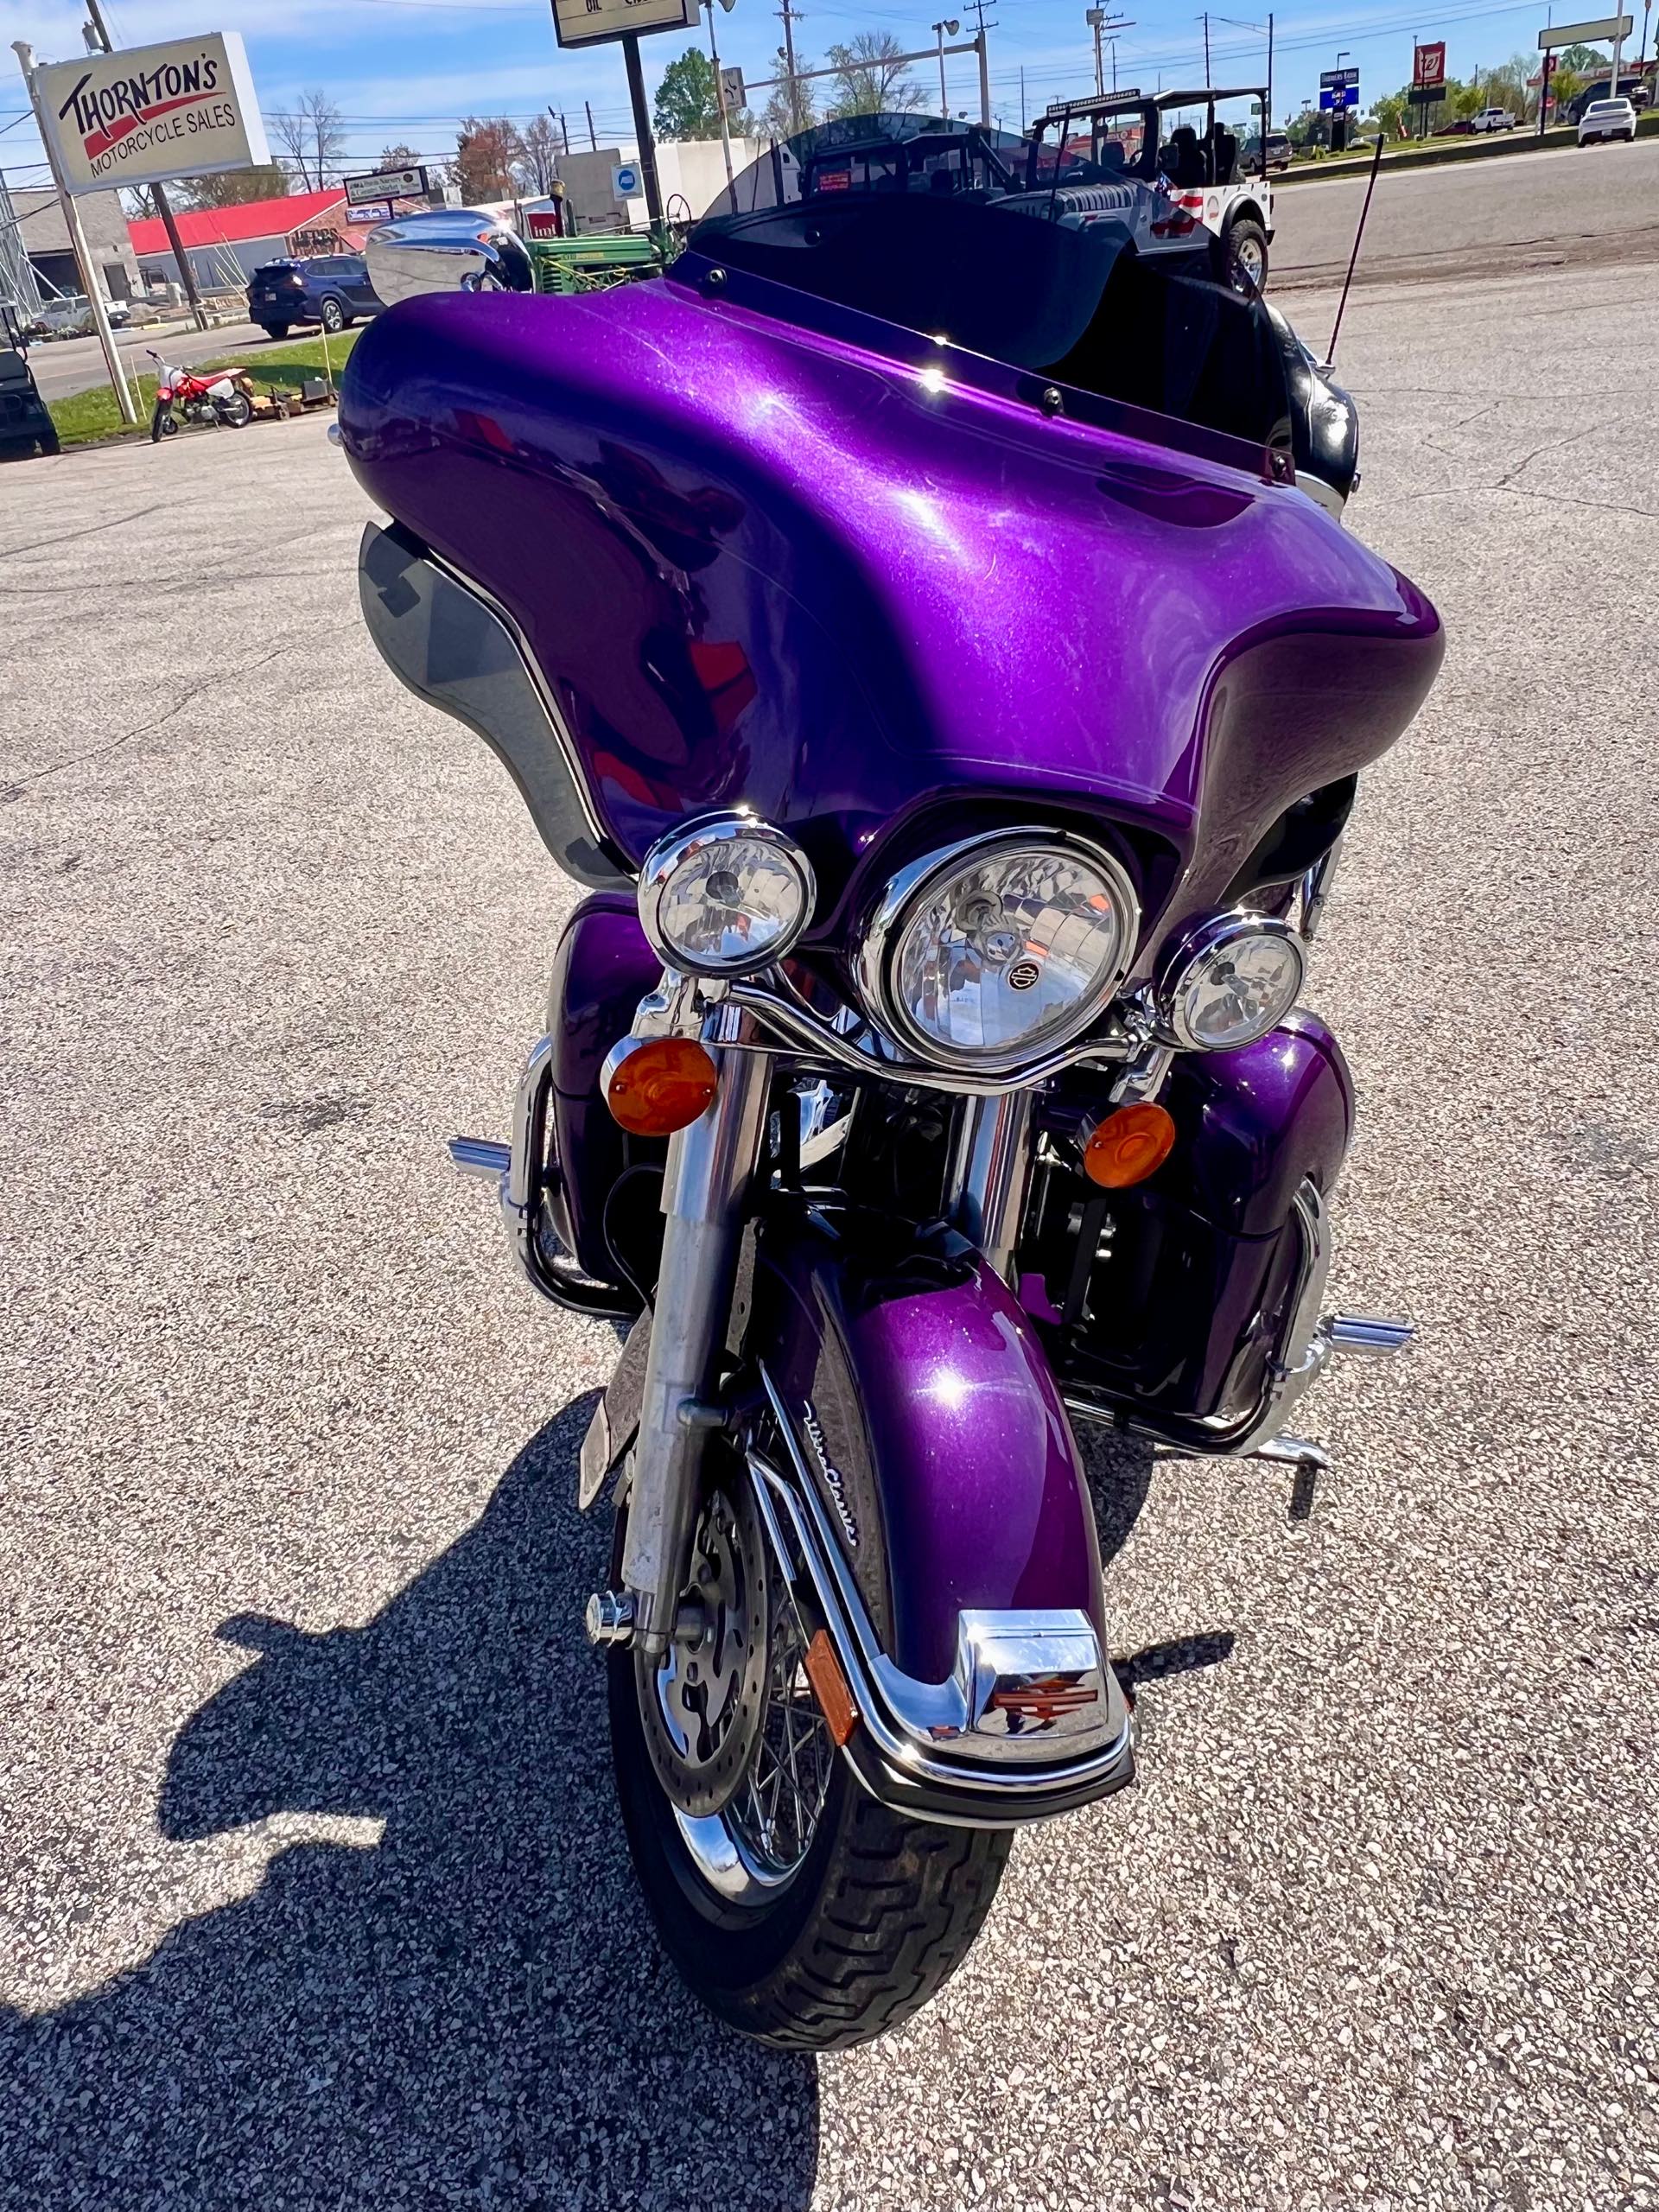 2008 Harley-Davidson Electra Glide Ultra Classic at Thornton's Motorcycle Sales, Madison, IN